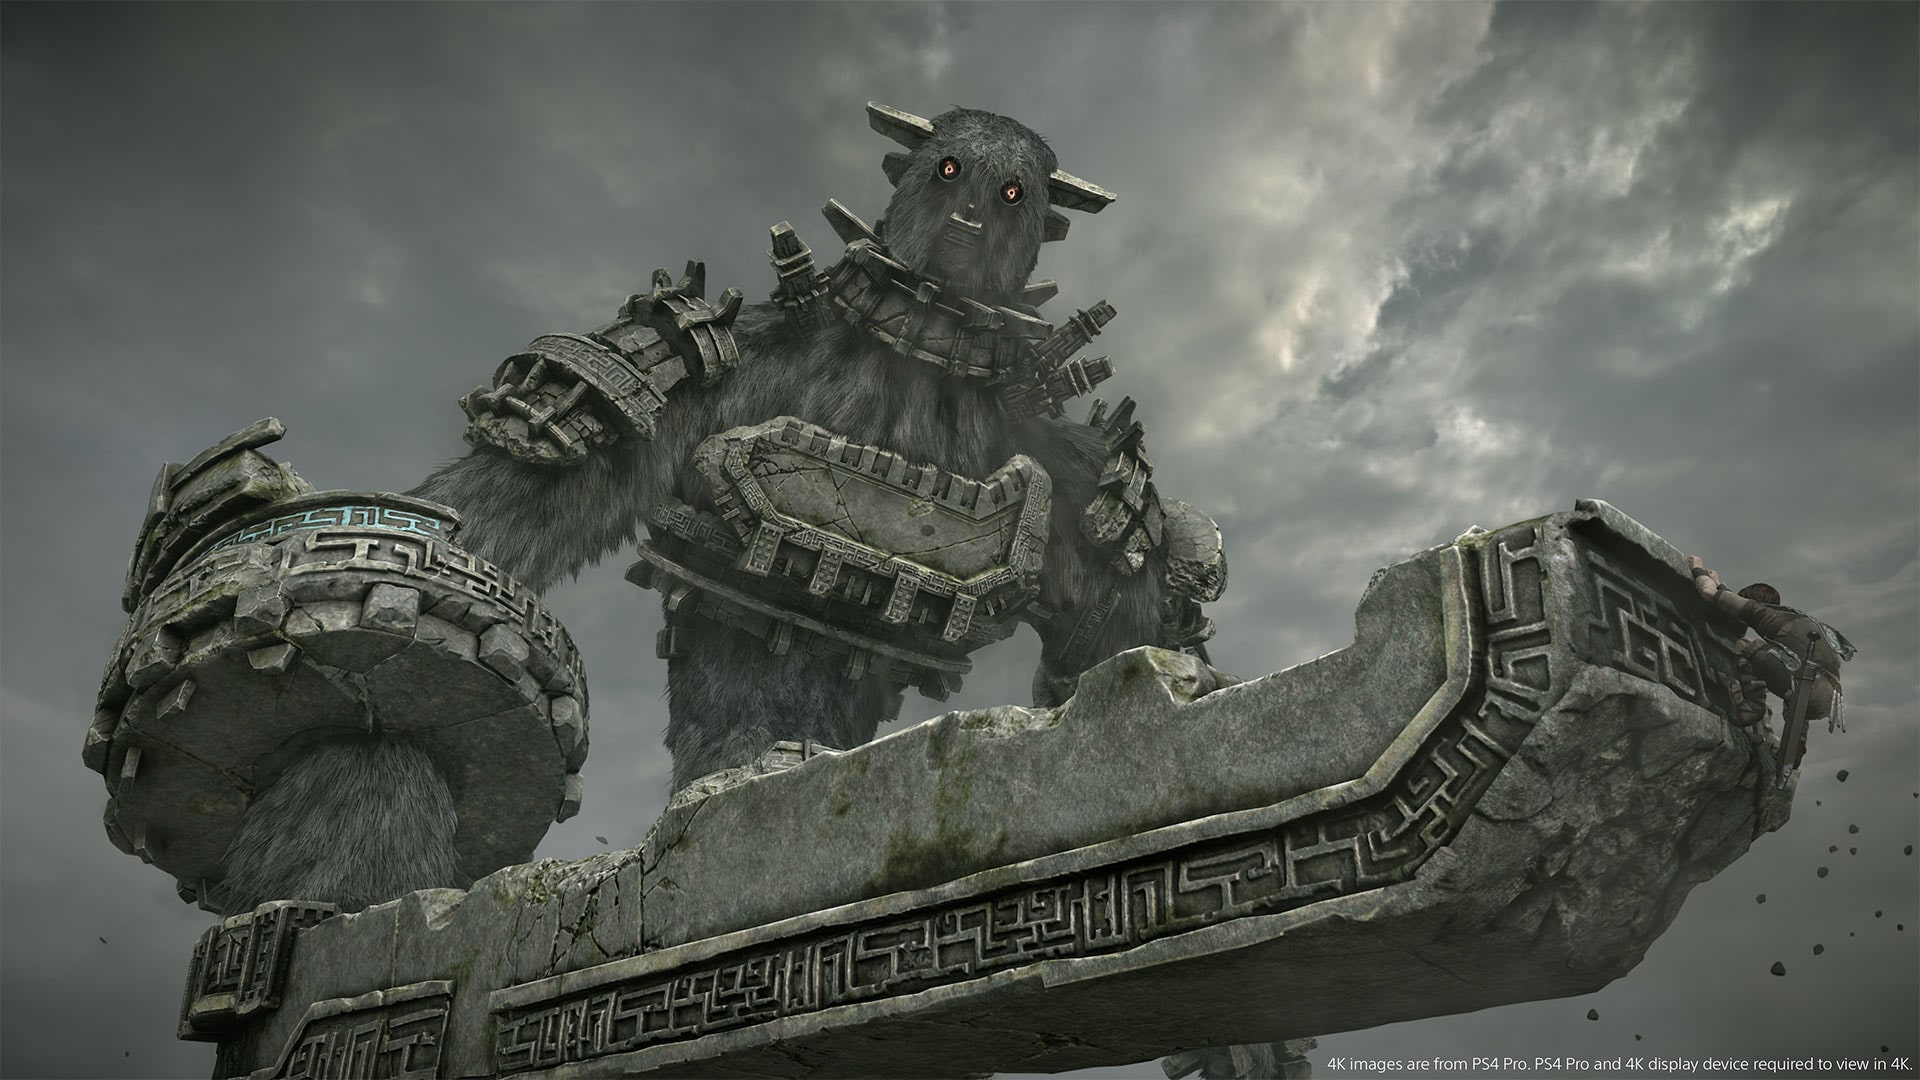 Shadow Of The Colossus on PS3 — price history, screenshots